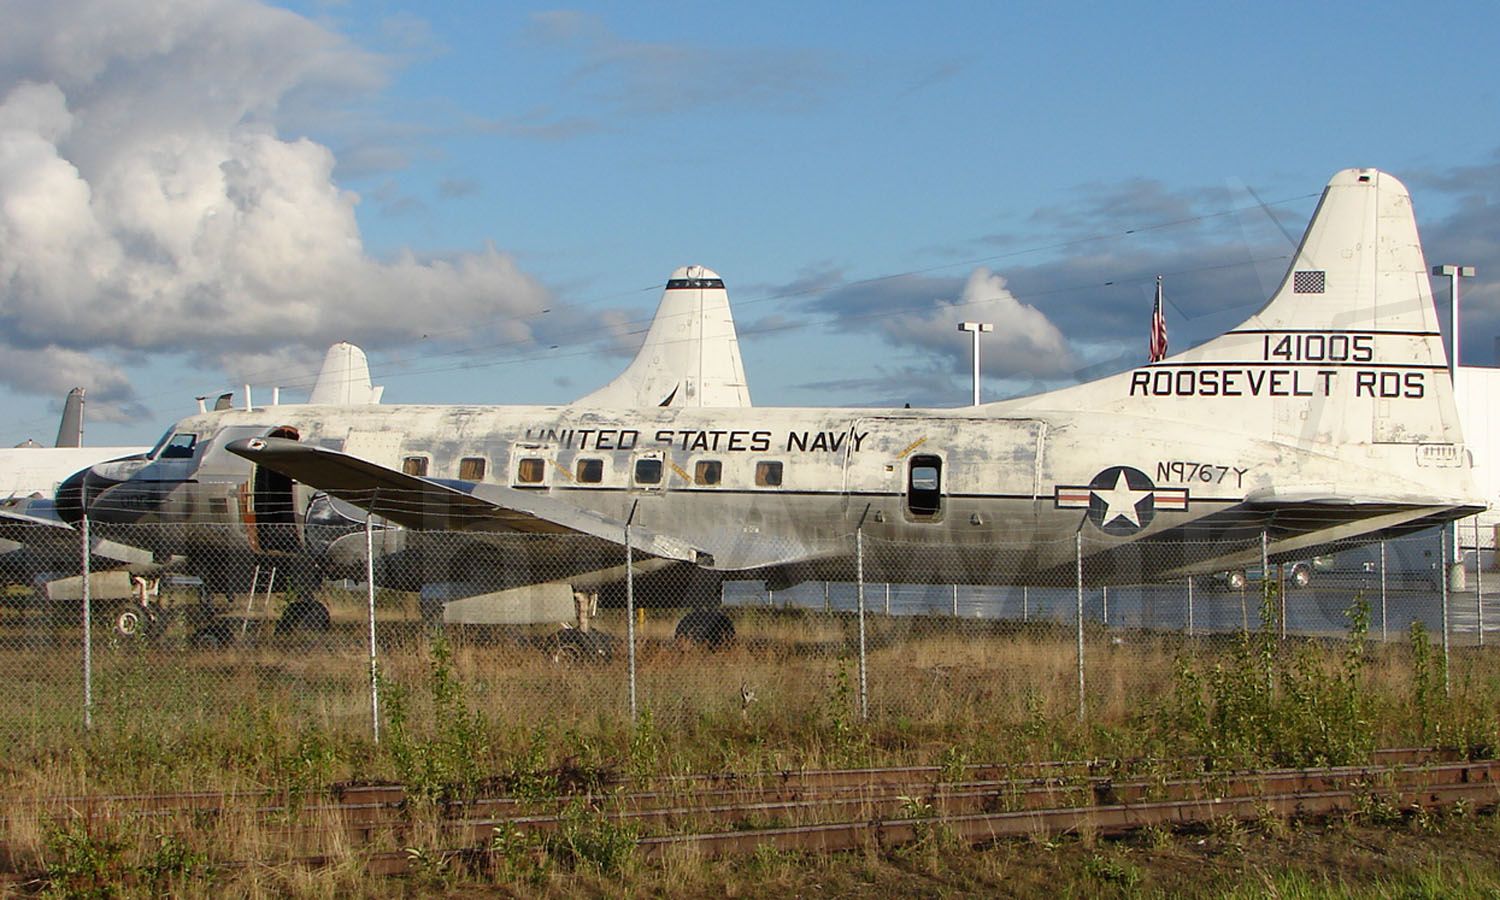 N9767Y — - Convair C-131F sits in Everts Fuel compound at Fairbanks - showing signs of it former life with US navy